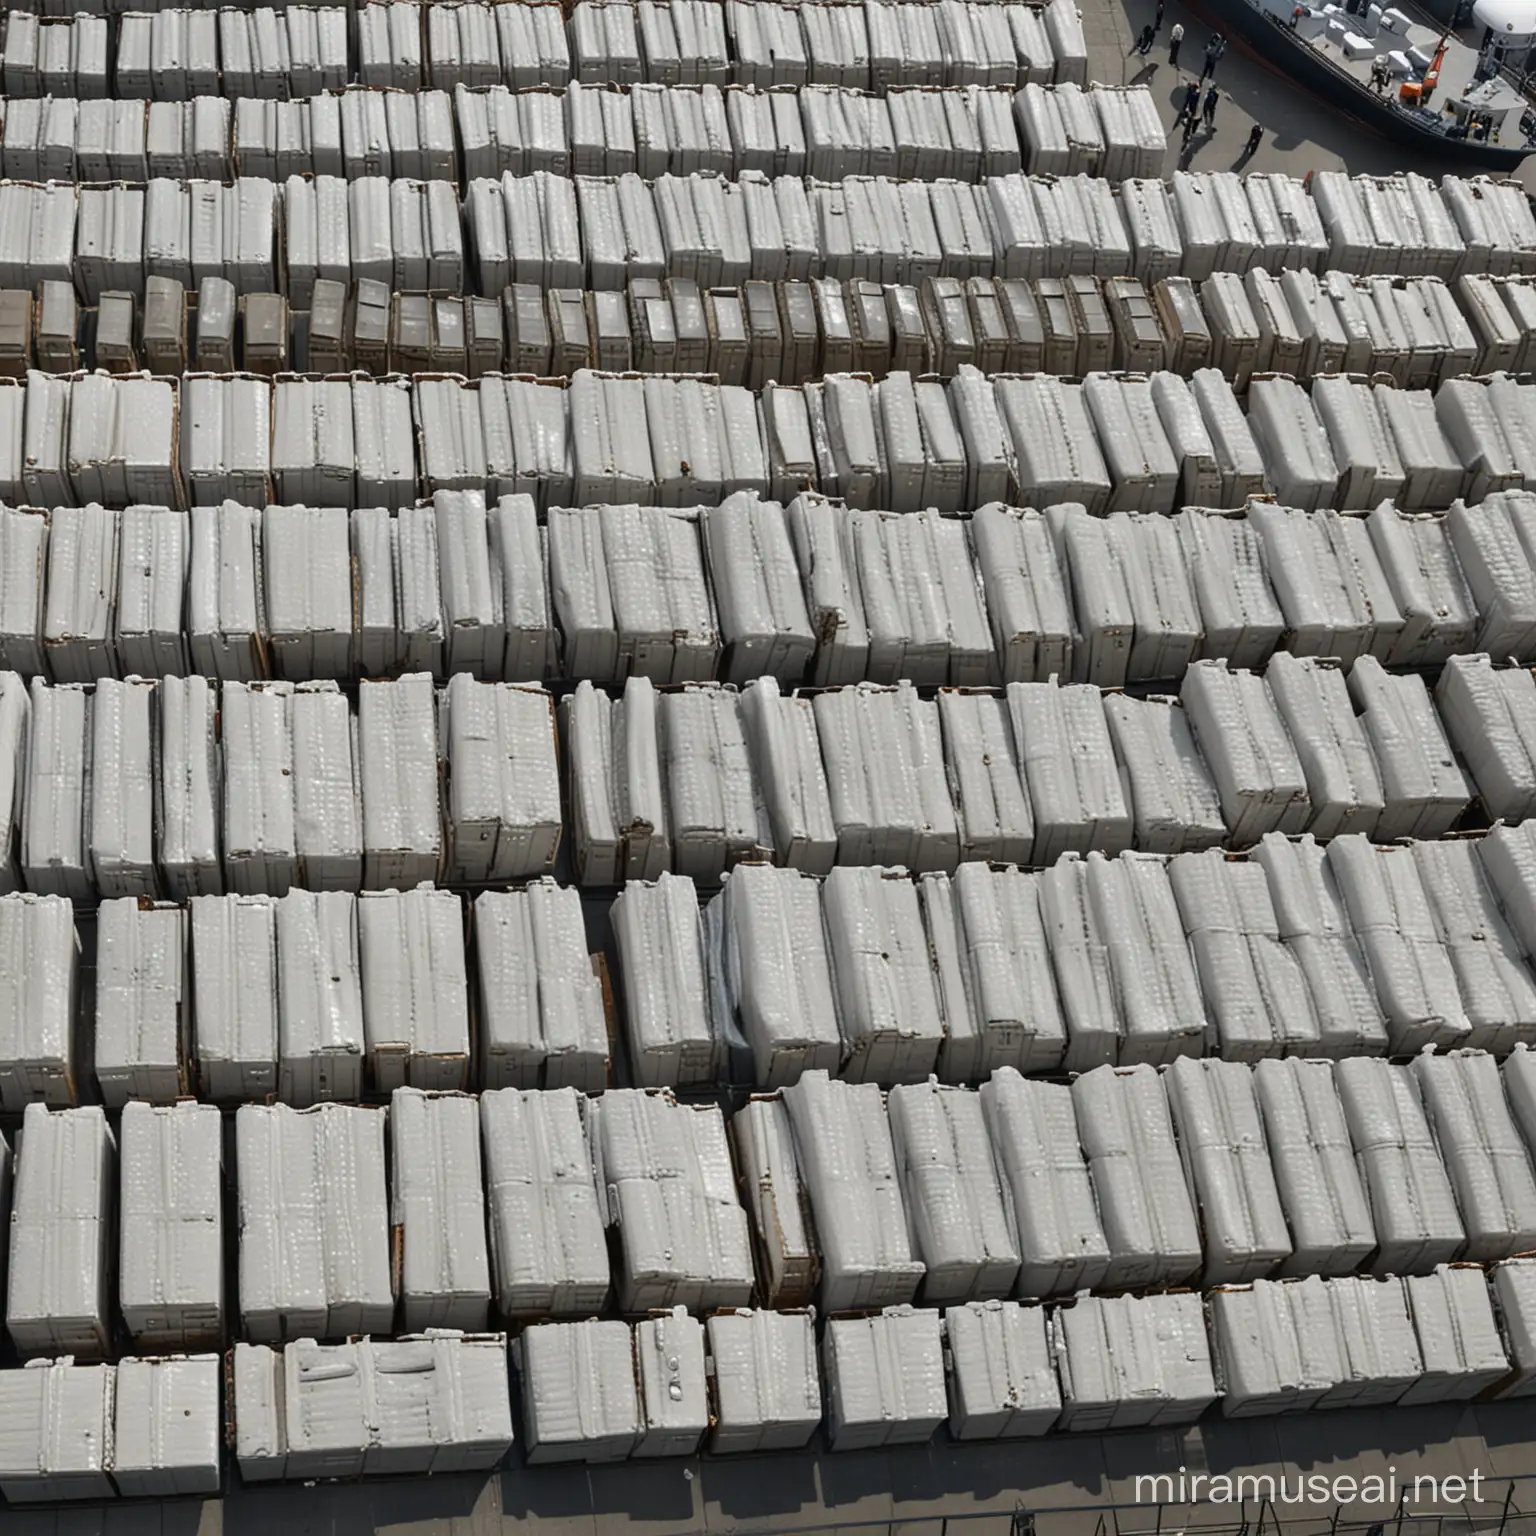 Seized Ship Containers Filled with Cocaine